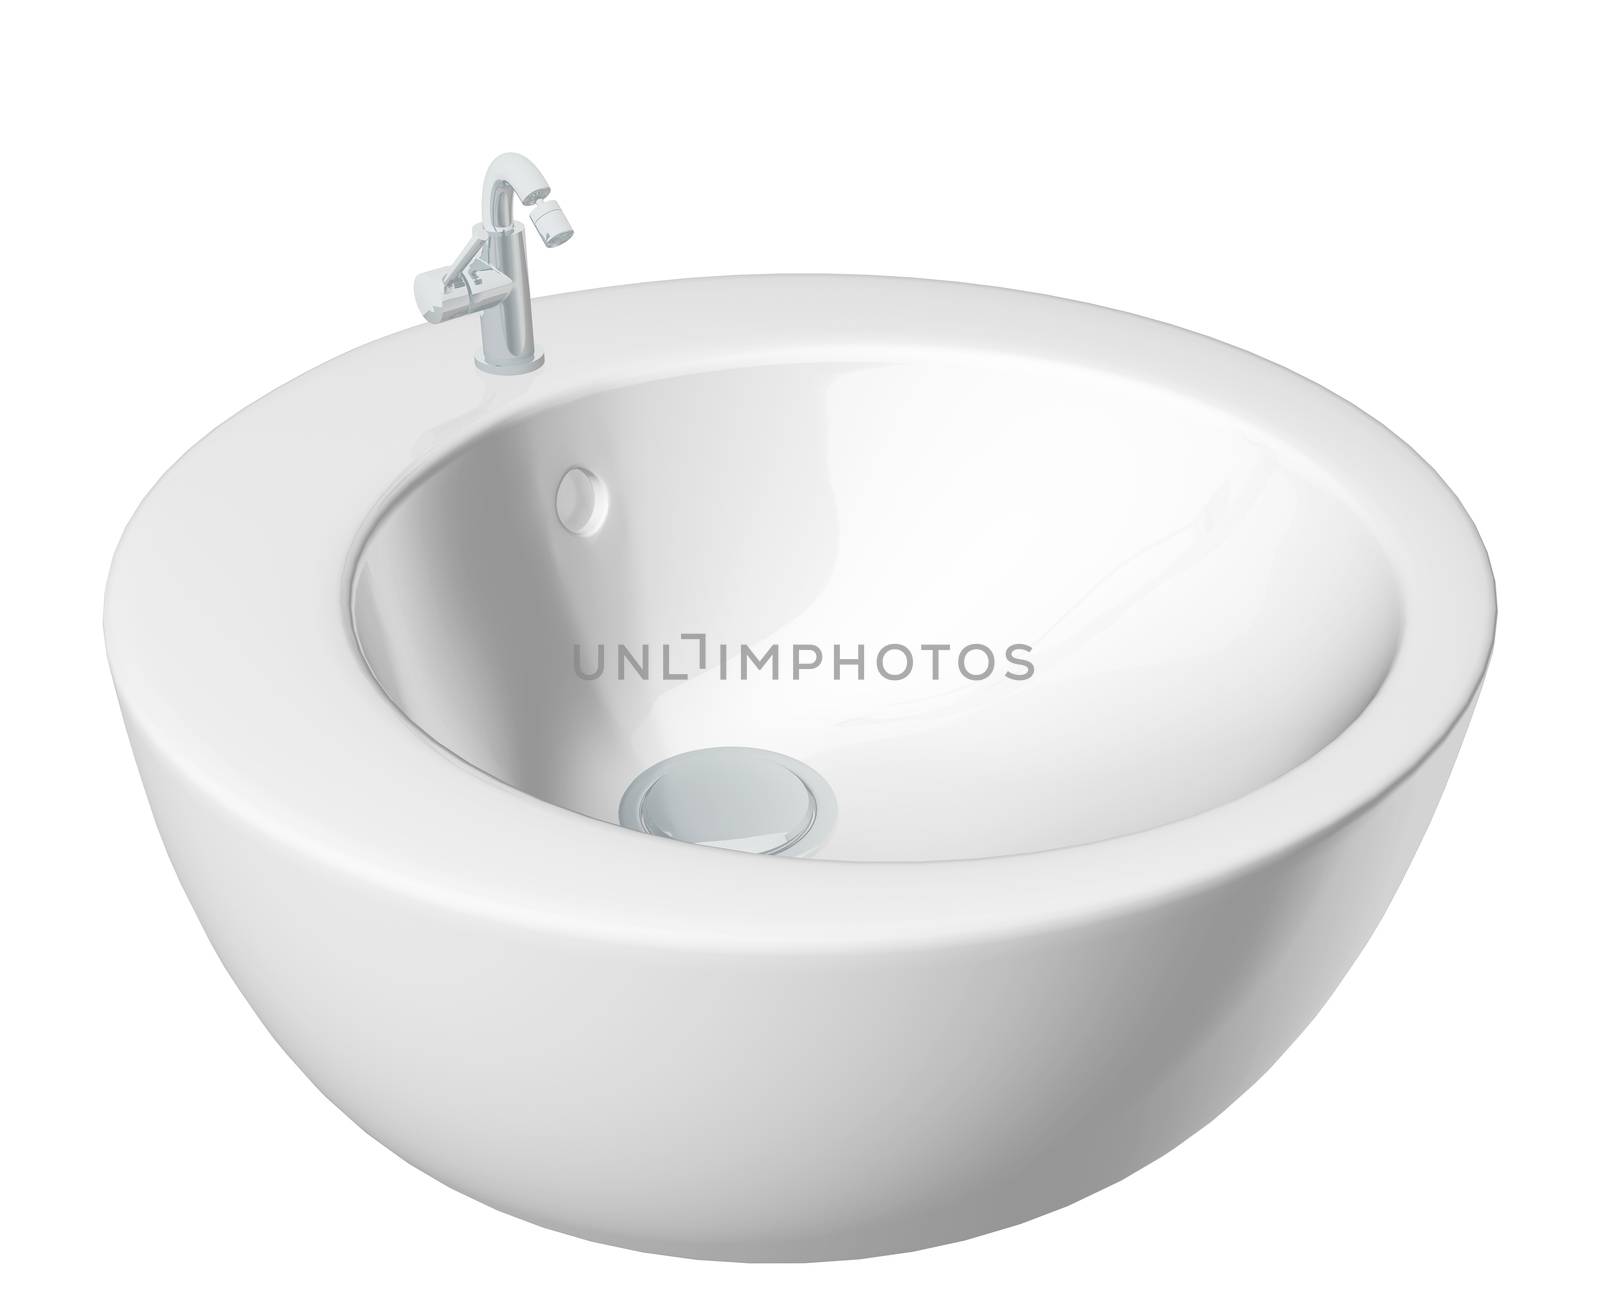 Modern round washbasin or sink, cream colored, isolated against a white background. by Morphart